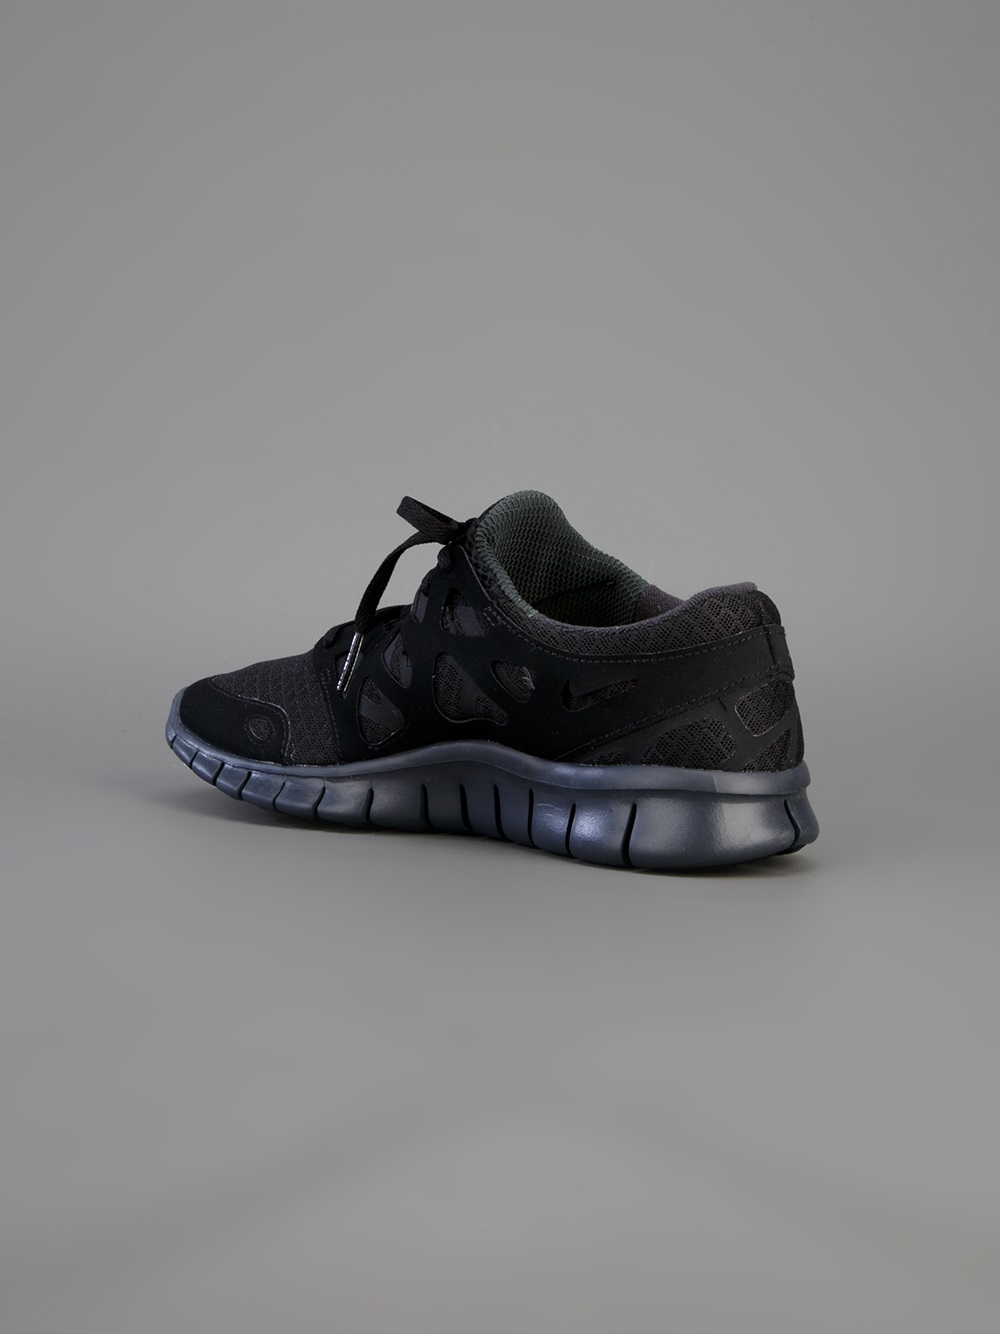 Nike Free Run 2 Nsw Trainer in Anthracite (Black) for Men - Lyst